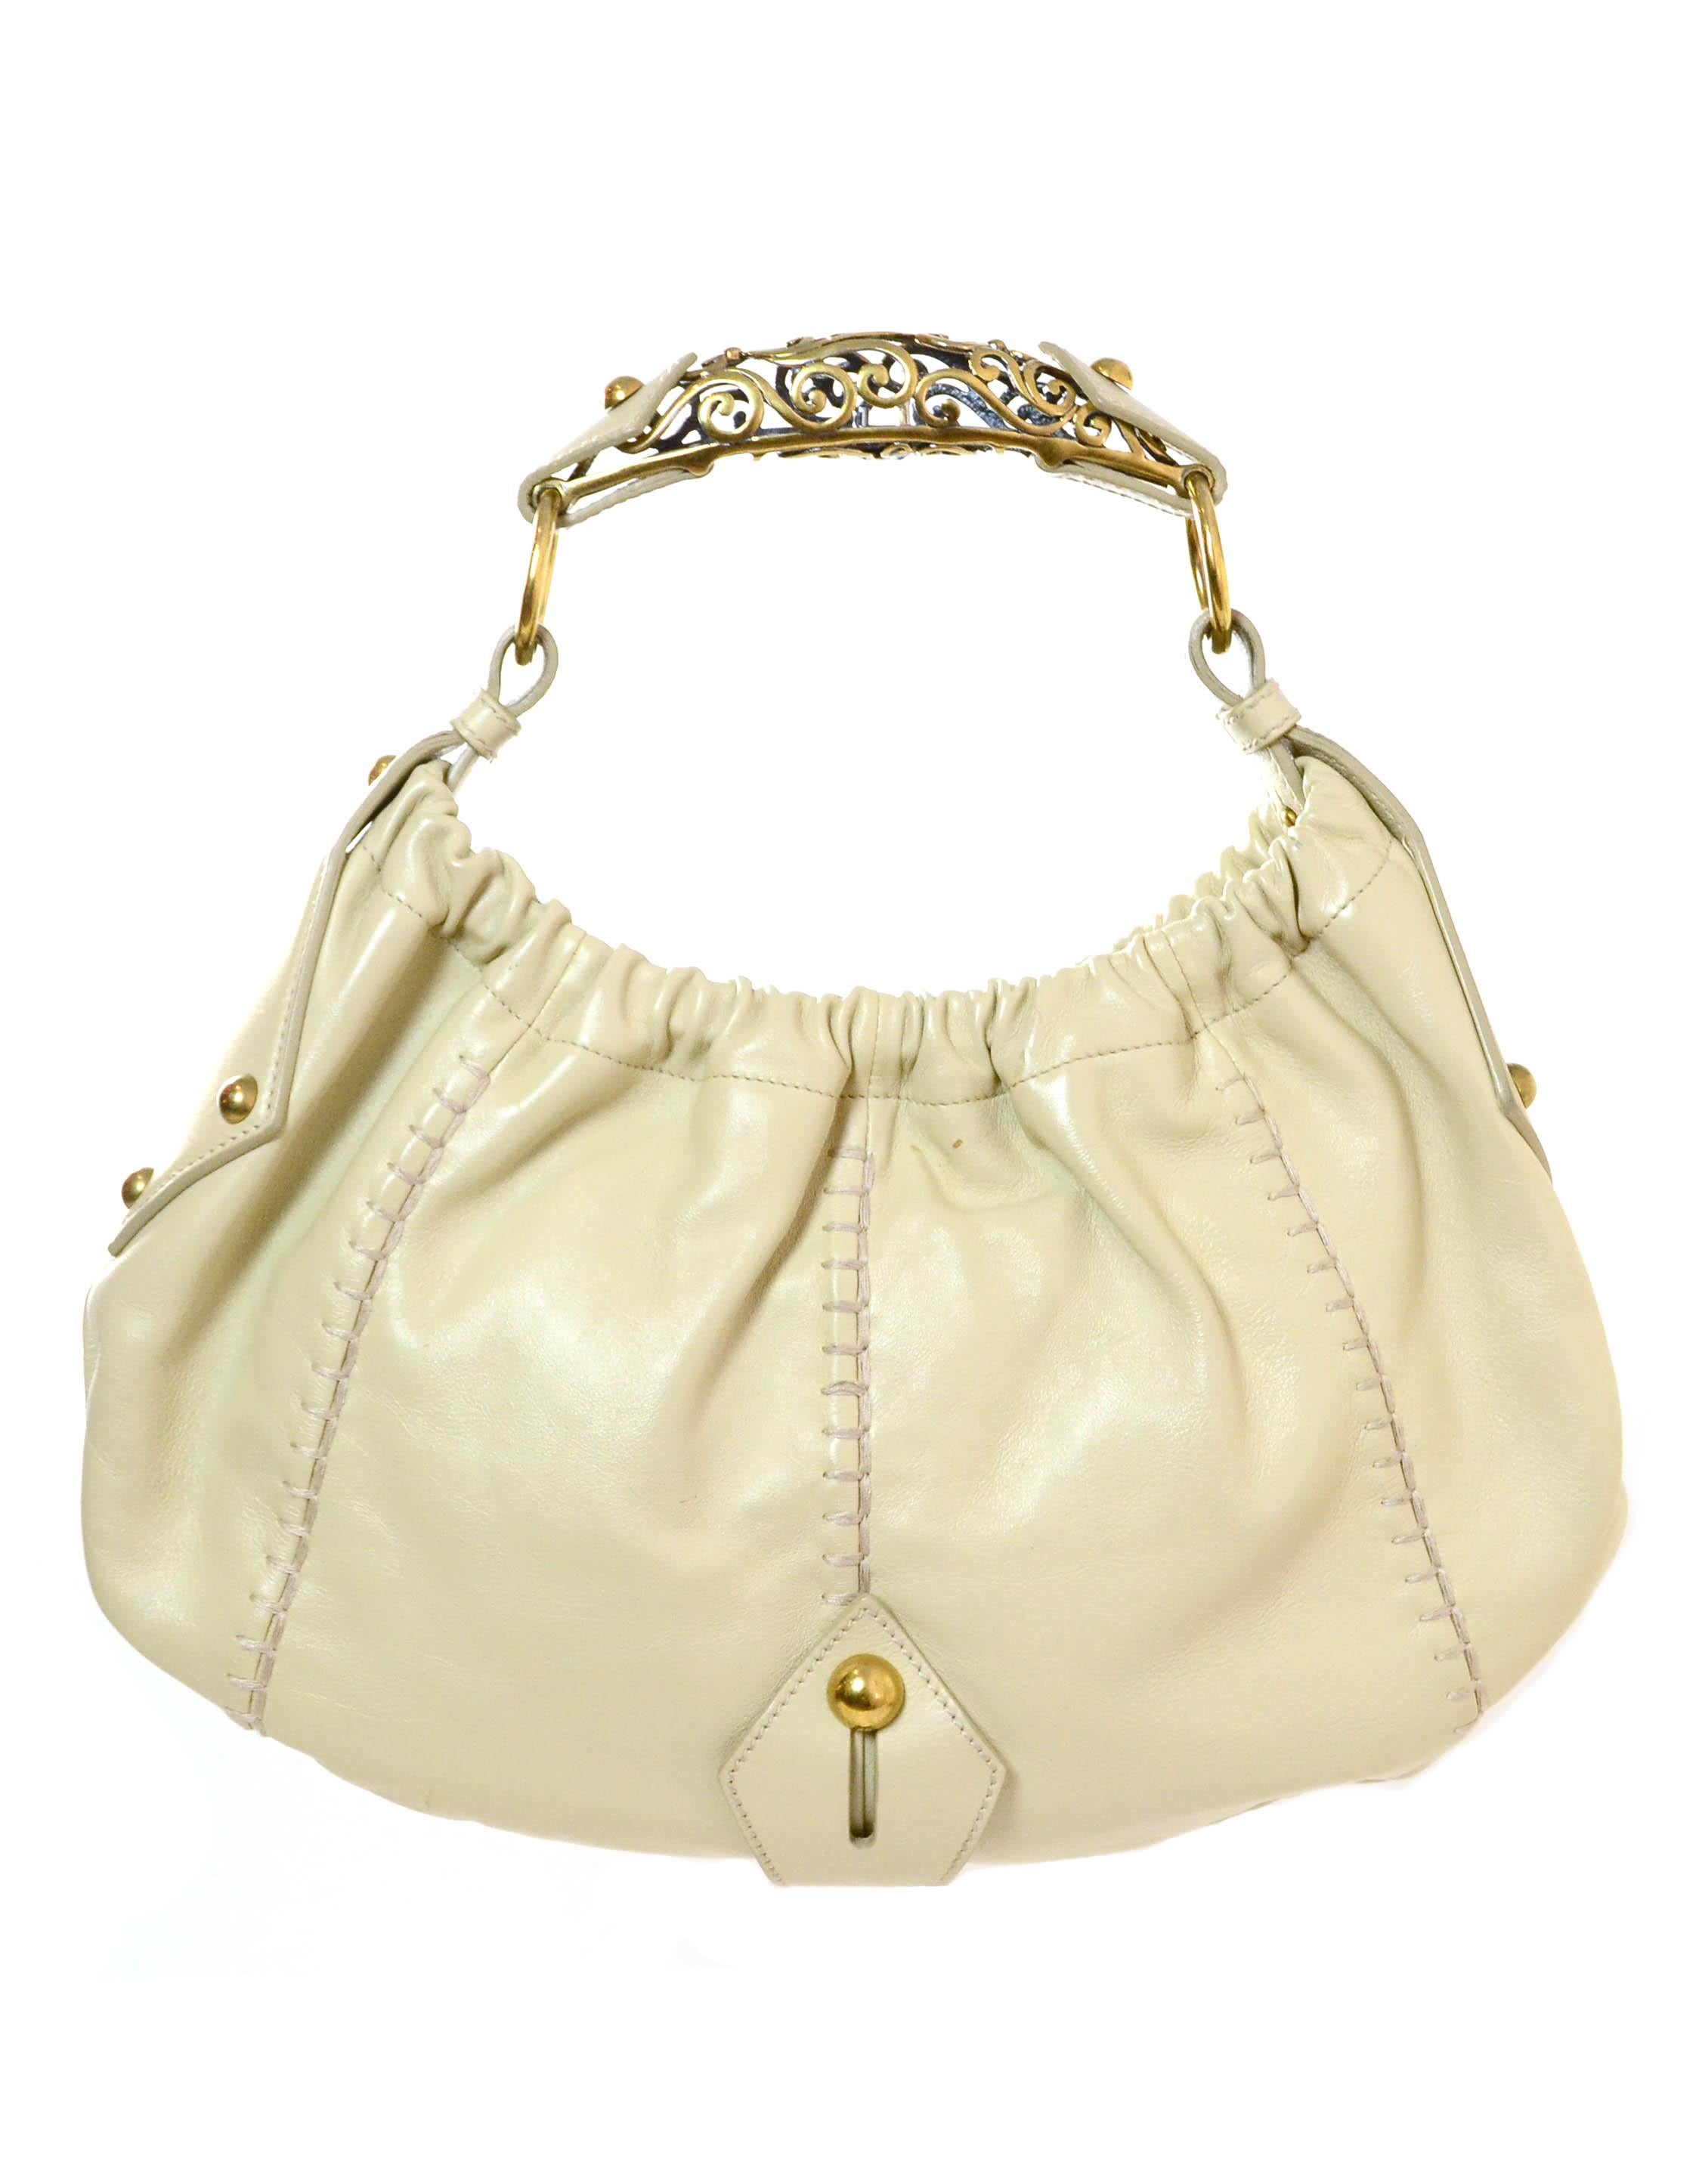 Yves Saint Laurent Beige Leather Vincennes Mombasa

Made In:
Year of Production: 2005
Color: Beige
Hardware: Antiqued goldtone
Materials: Leather and metal
Lining: Fine textile
Closure/Opening: Center magnetic snap
Exterior Pockets: None
Interior